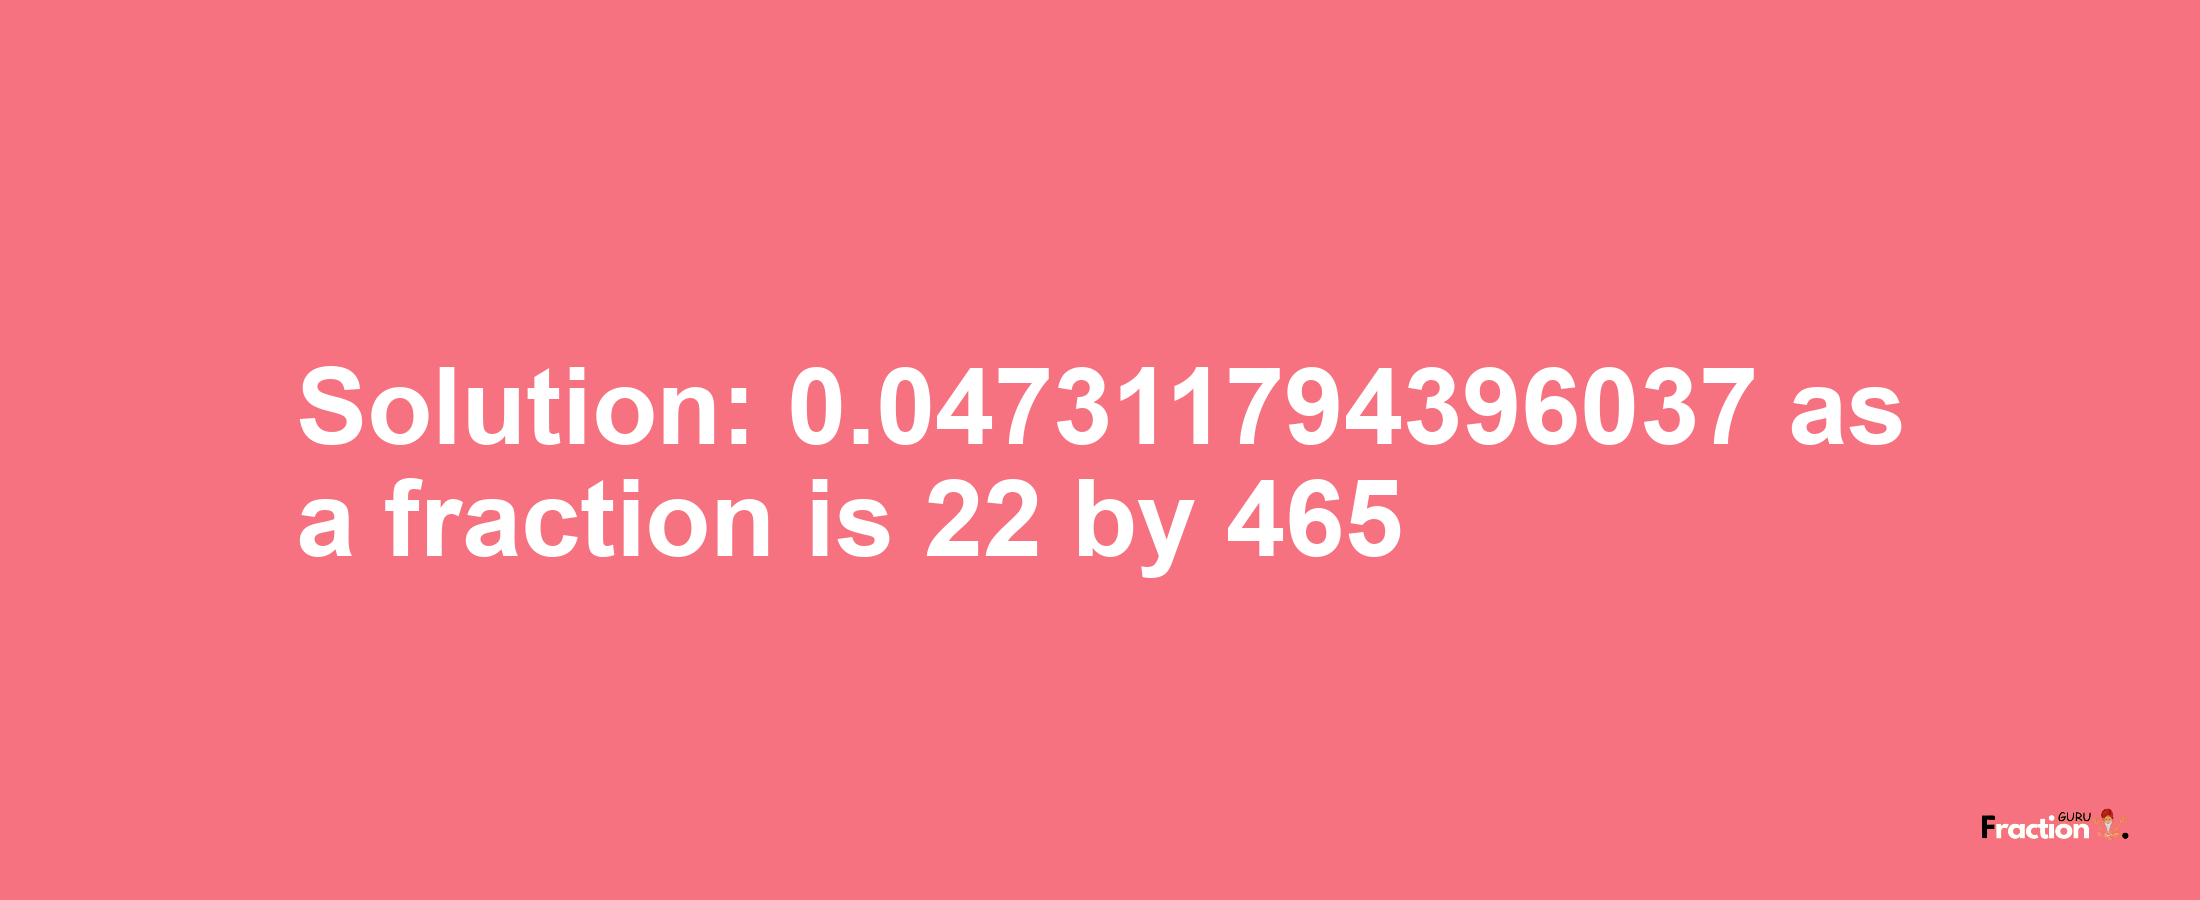 Solution:0.047311794396037 as a fraction is 22/465